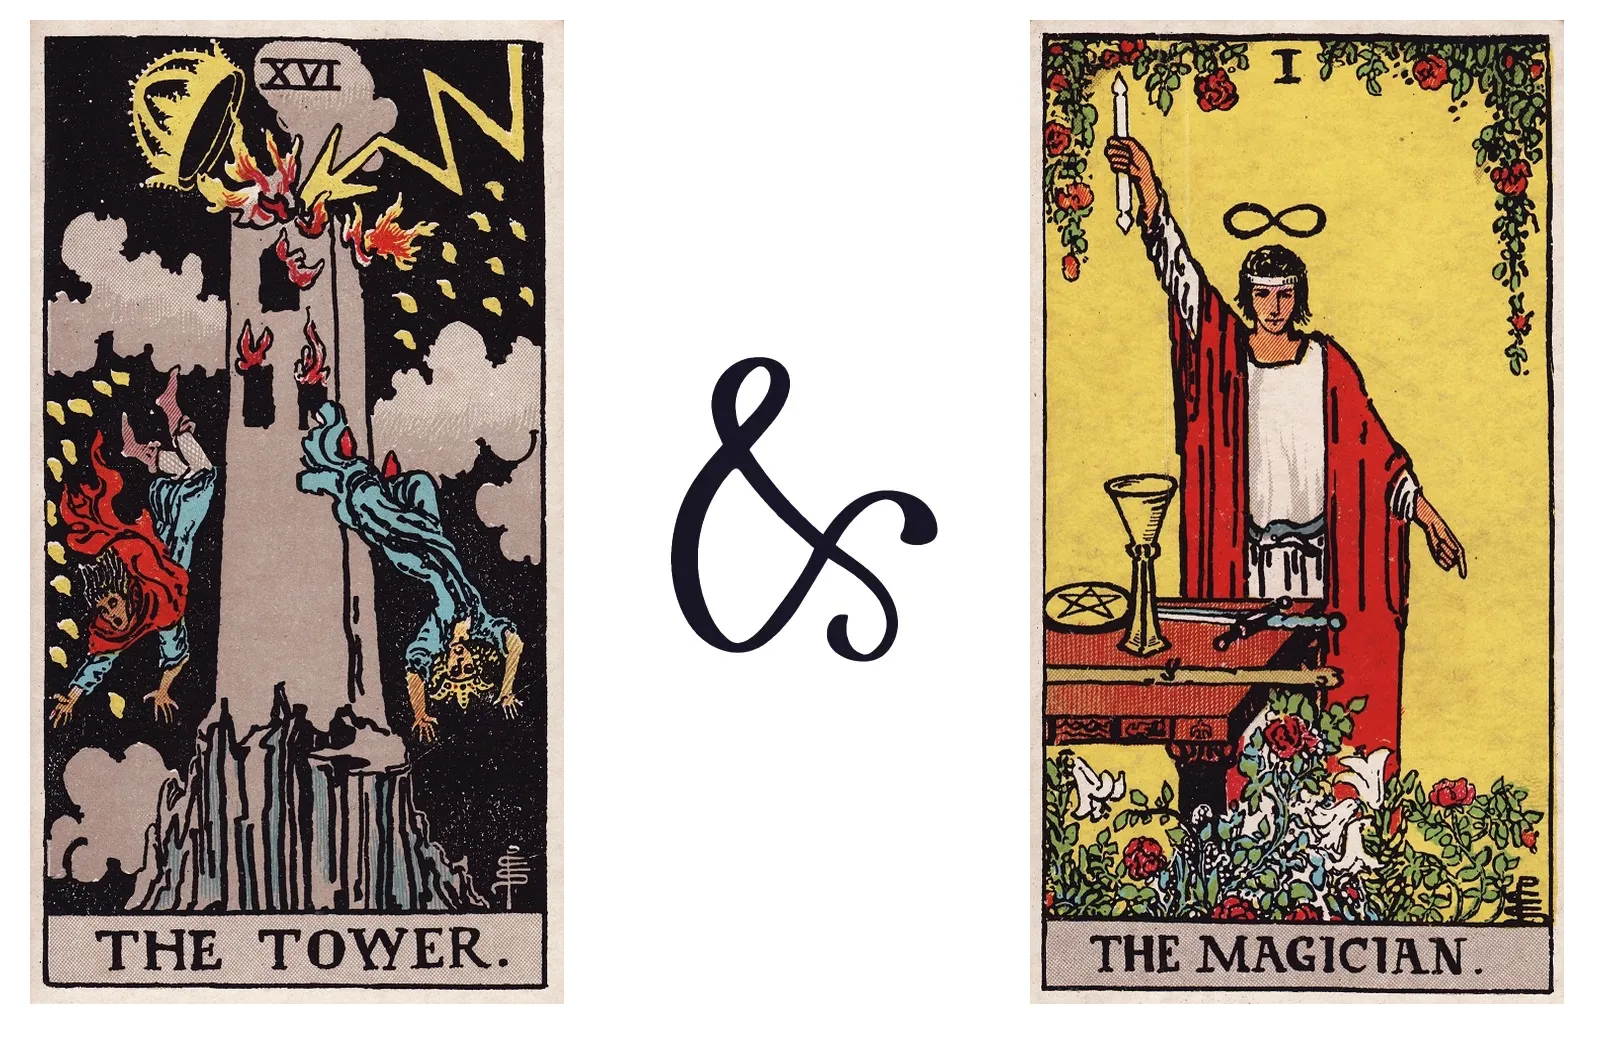 The Tower and The Magician